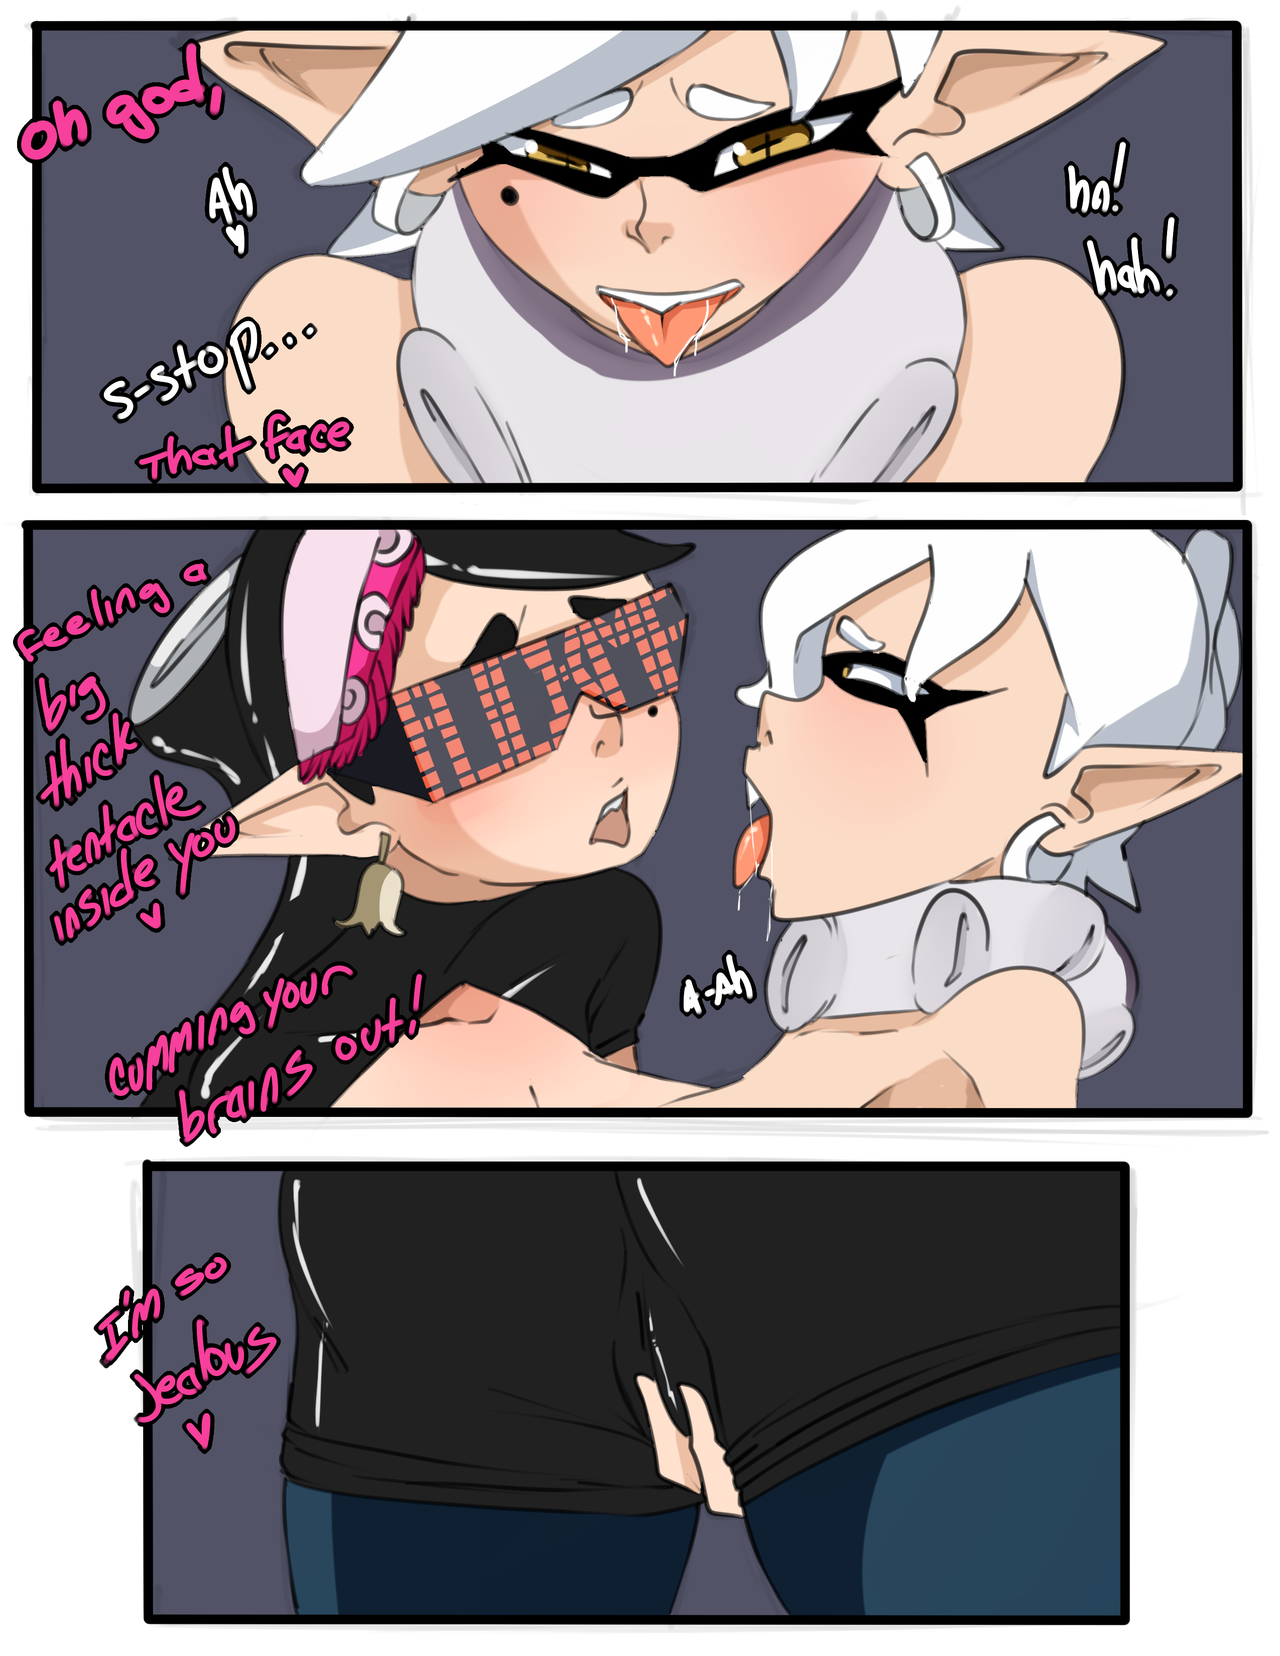 inuyuru2: Octo-puss pages 11-13 Commission comic for @malprac  ;9